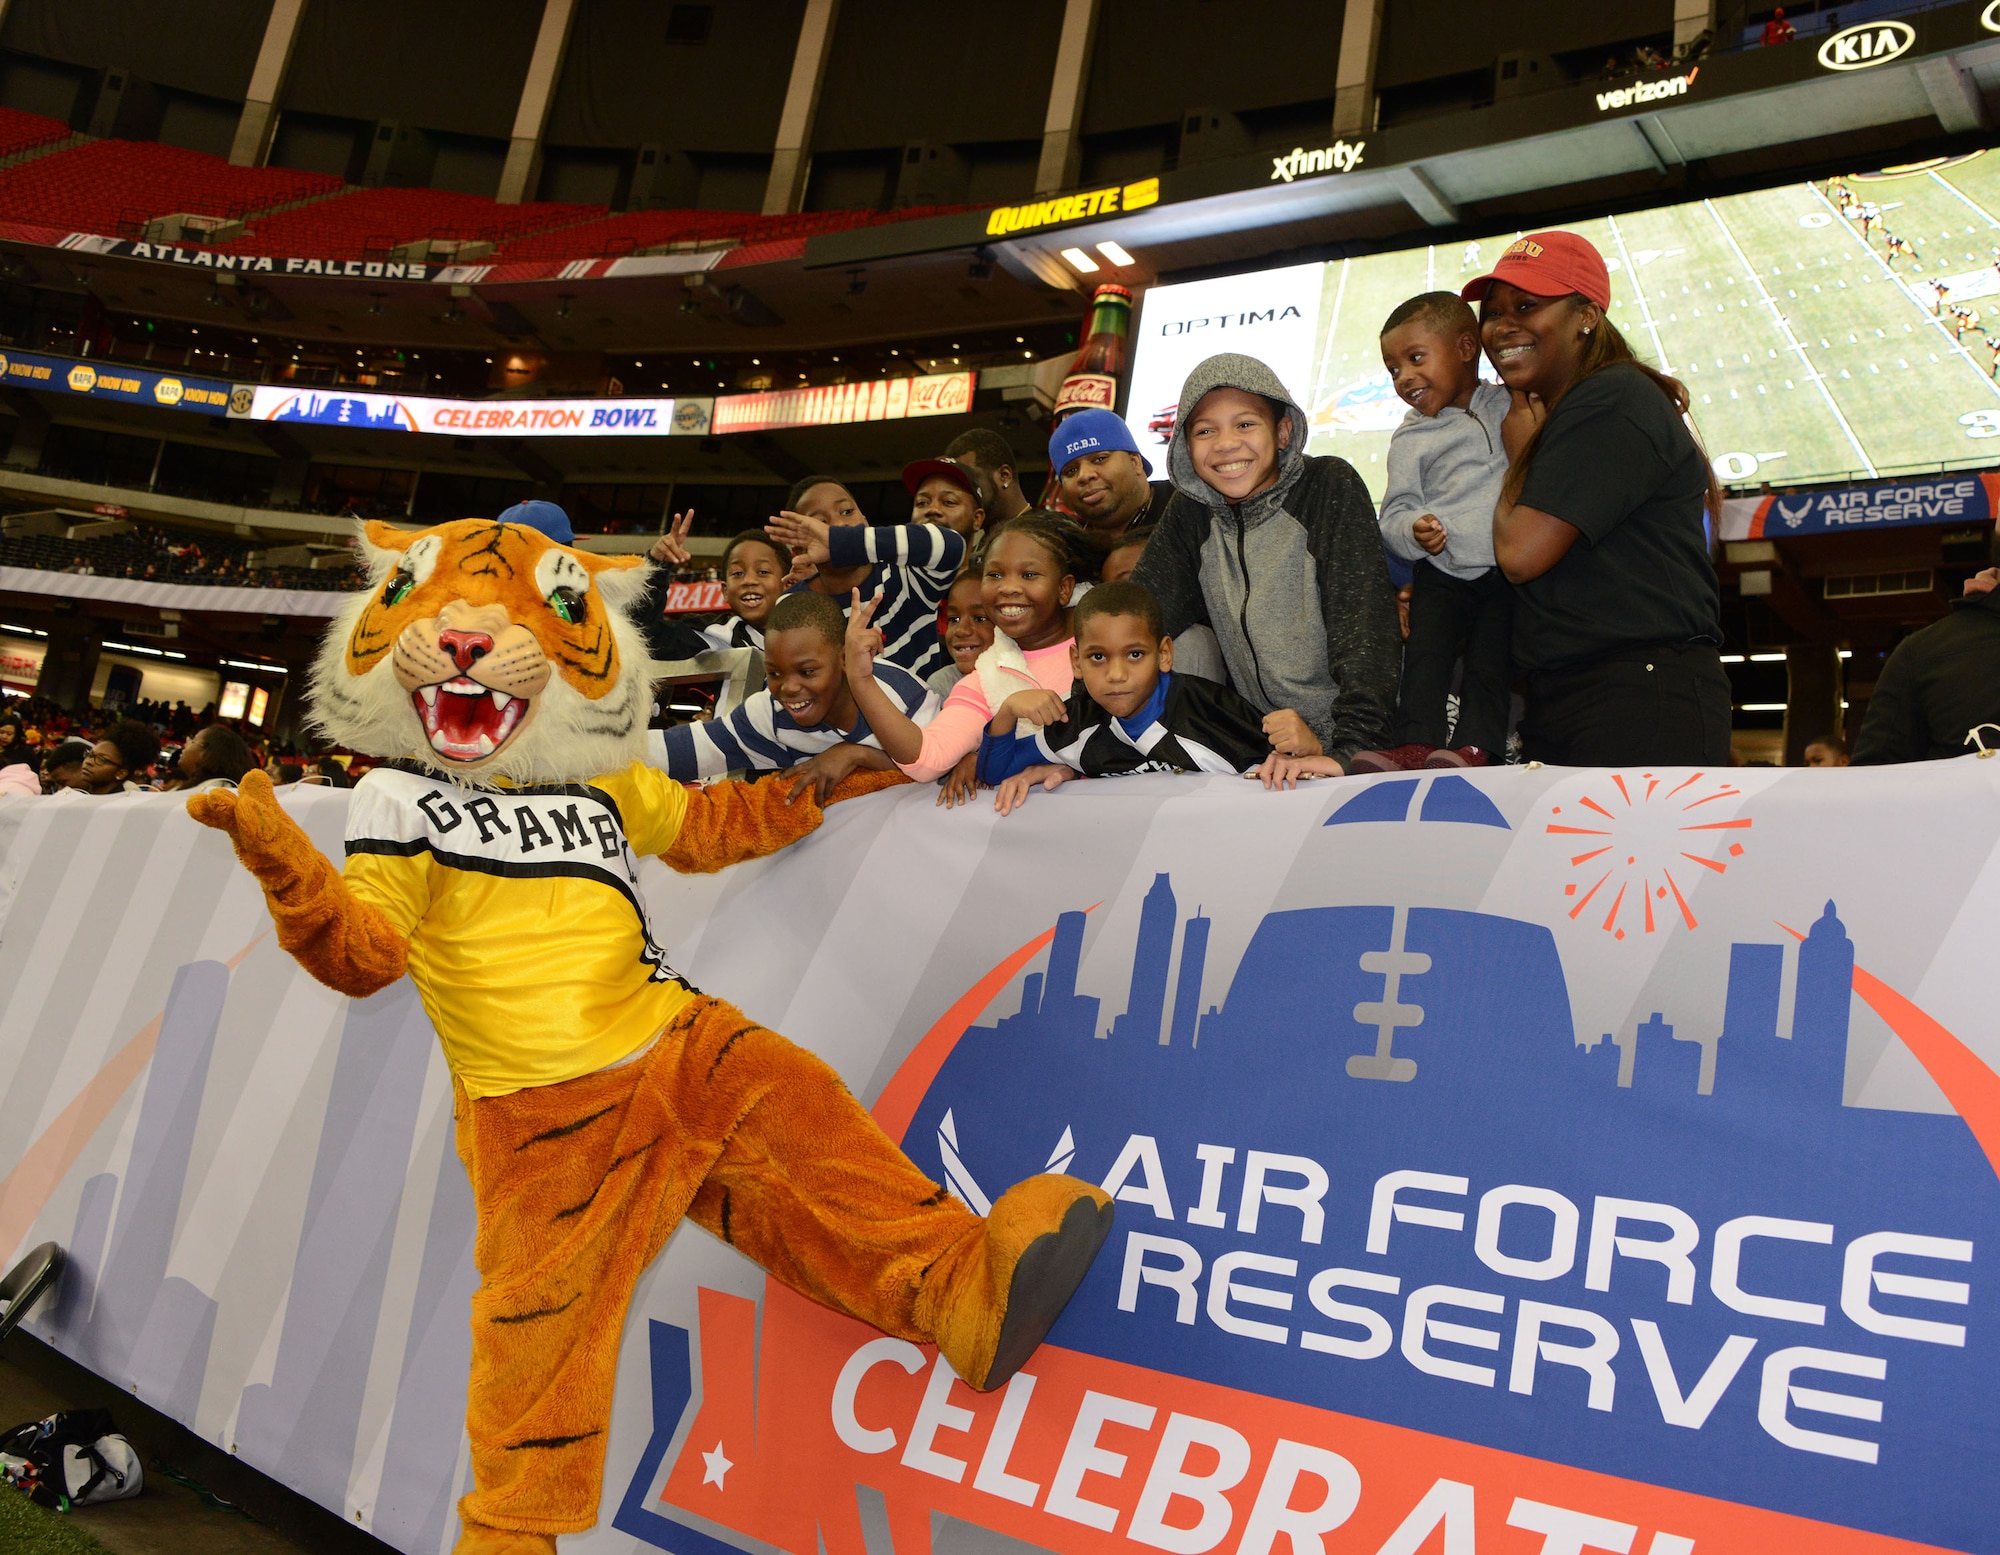 Wheaton, a senior at Grambling State University in Lousiana, suited up as the school’s mascot for the last time during the Air Force Reserve Command Celebration Bowl Dec. 17 in Atlanta. Grambling beat North Carolina Central 10-9. (U.S. Air Force photo by Master Sgt. Chance Babin)